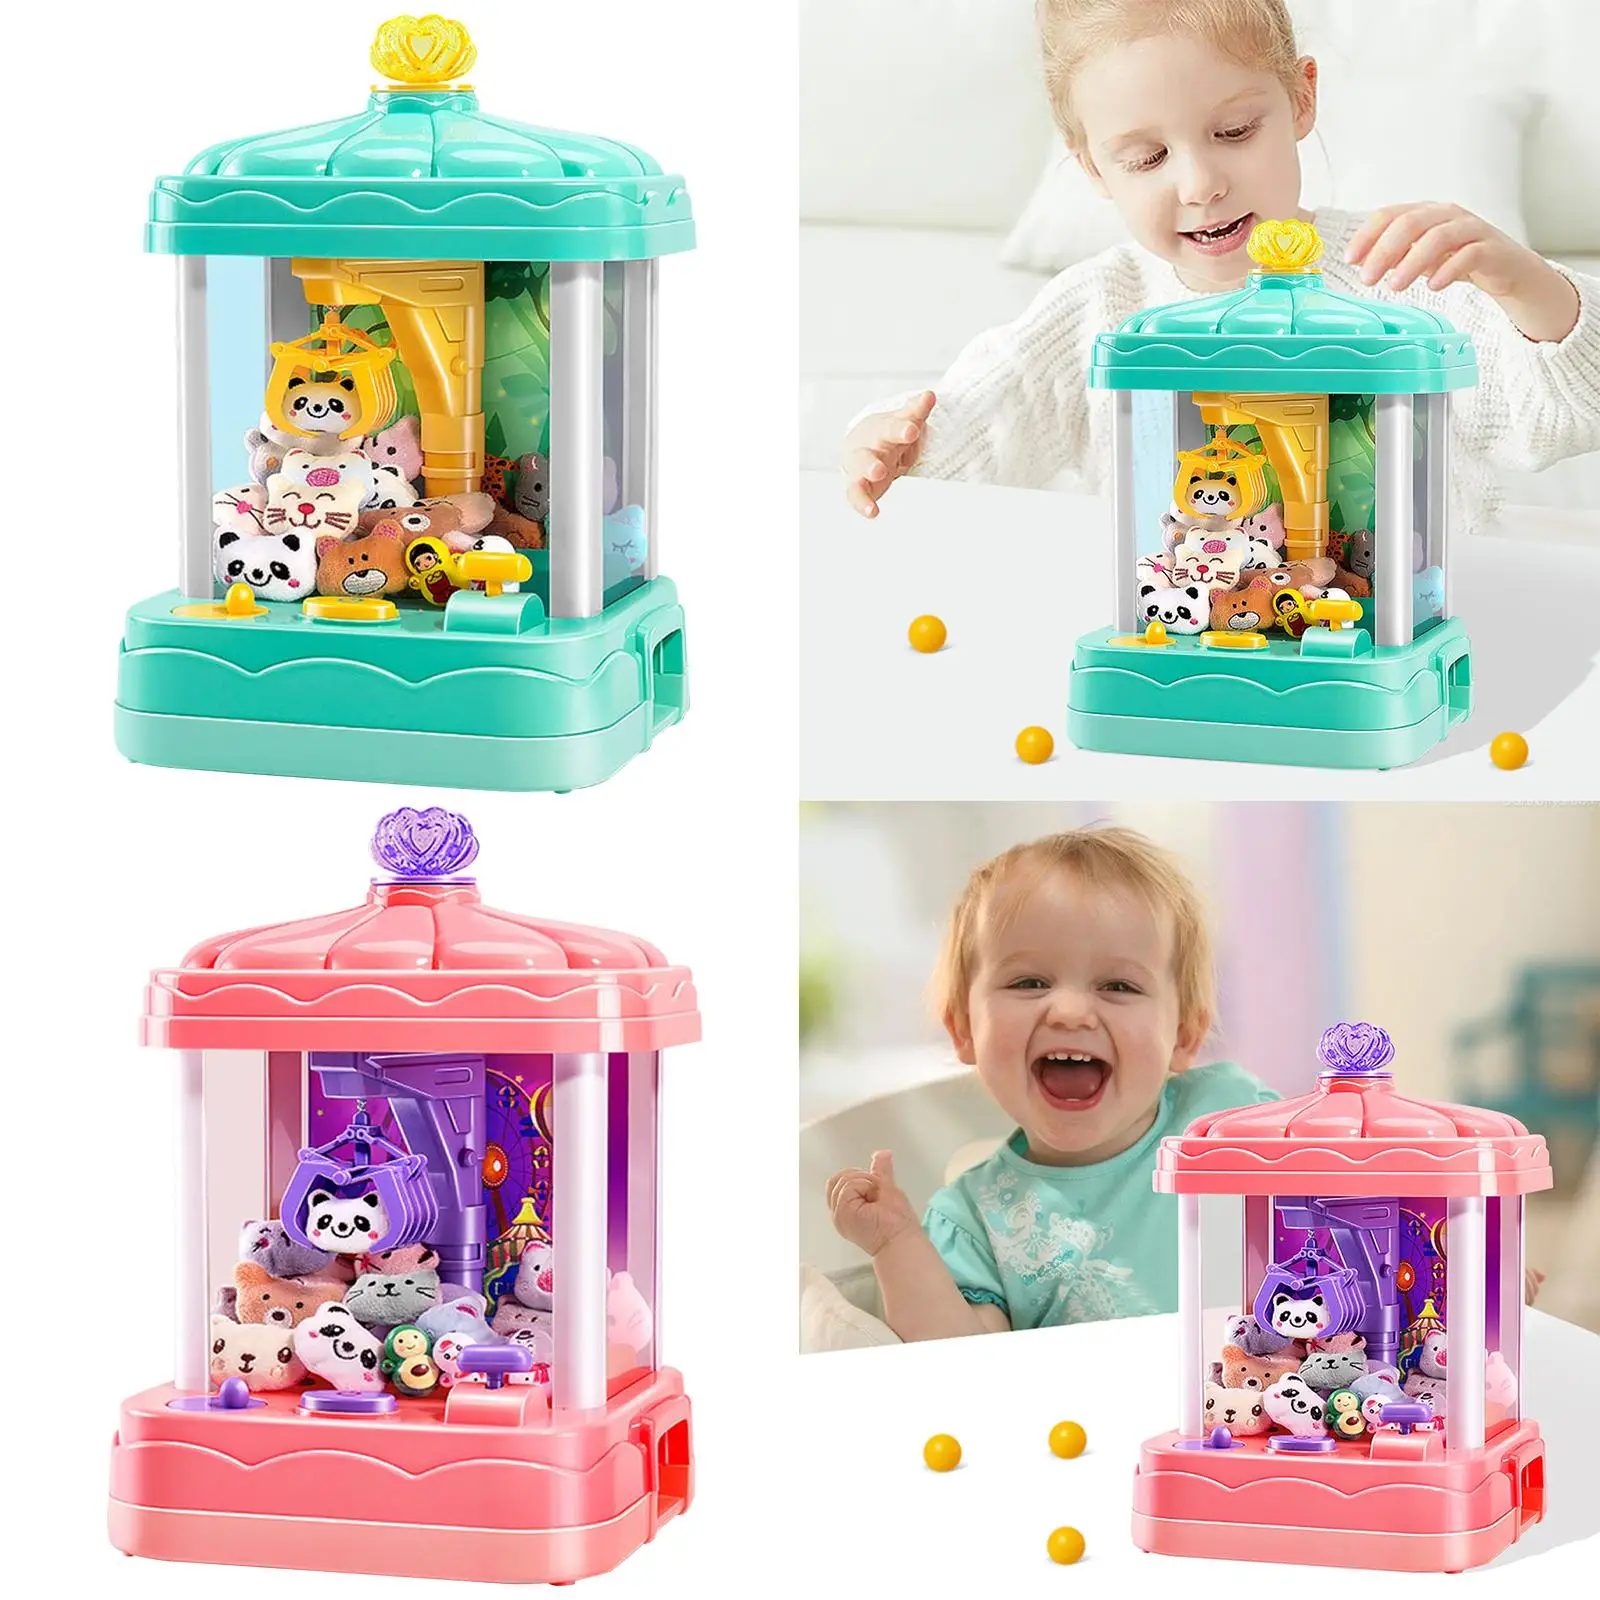 Mini Claw Catch Toy Crane Machines Multifunction Dual Power Mode Play Game